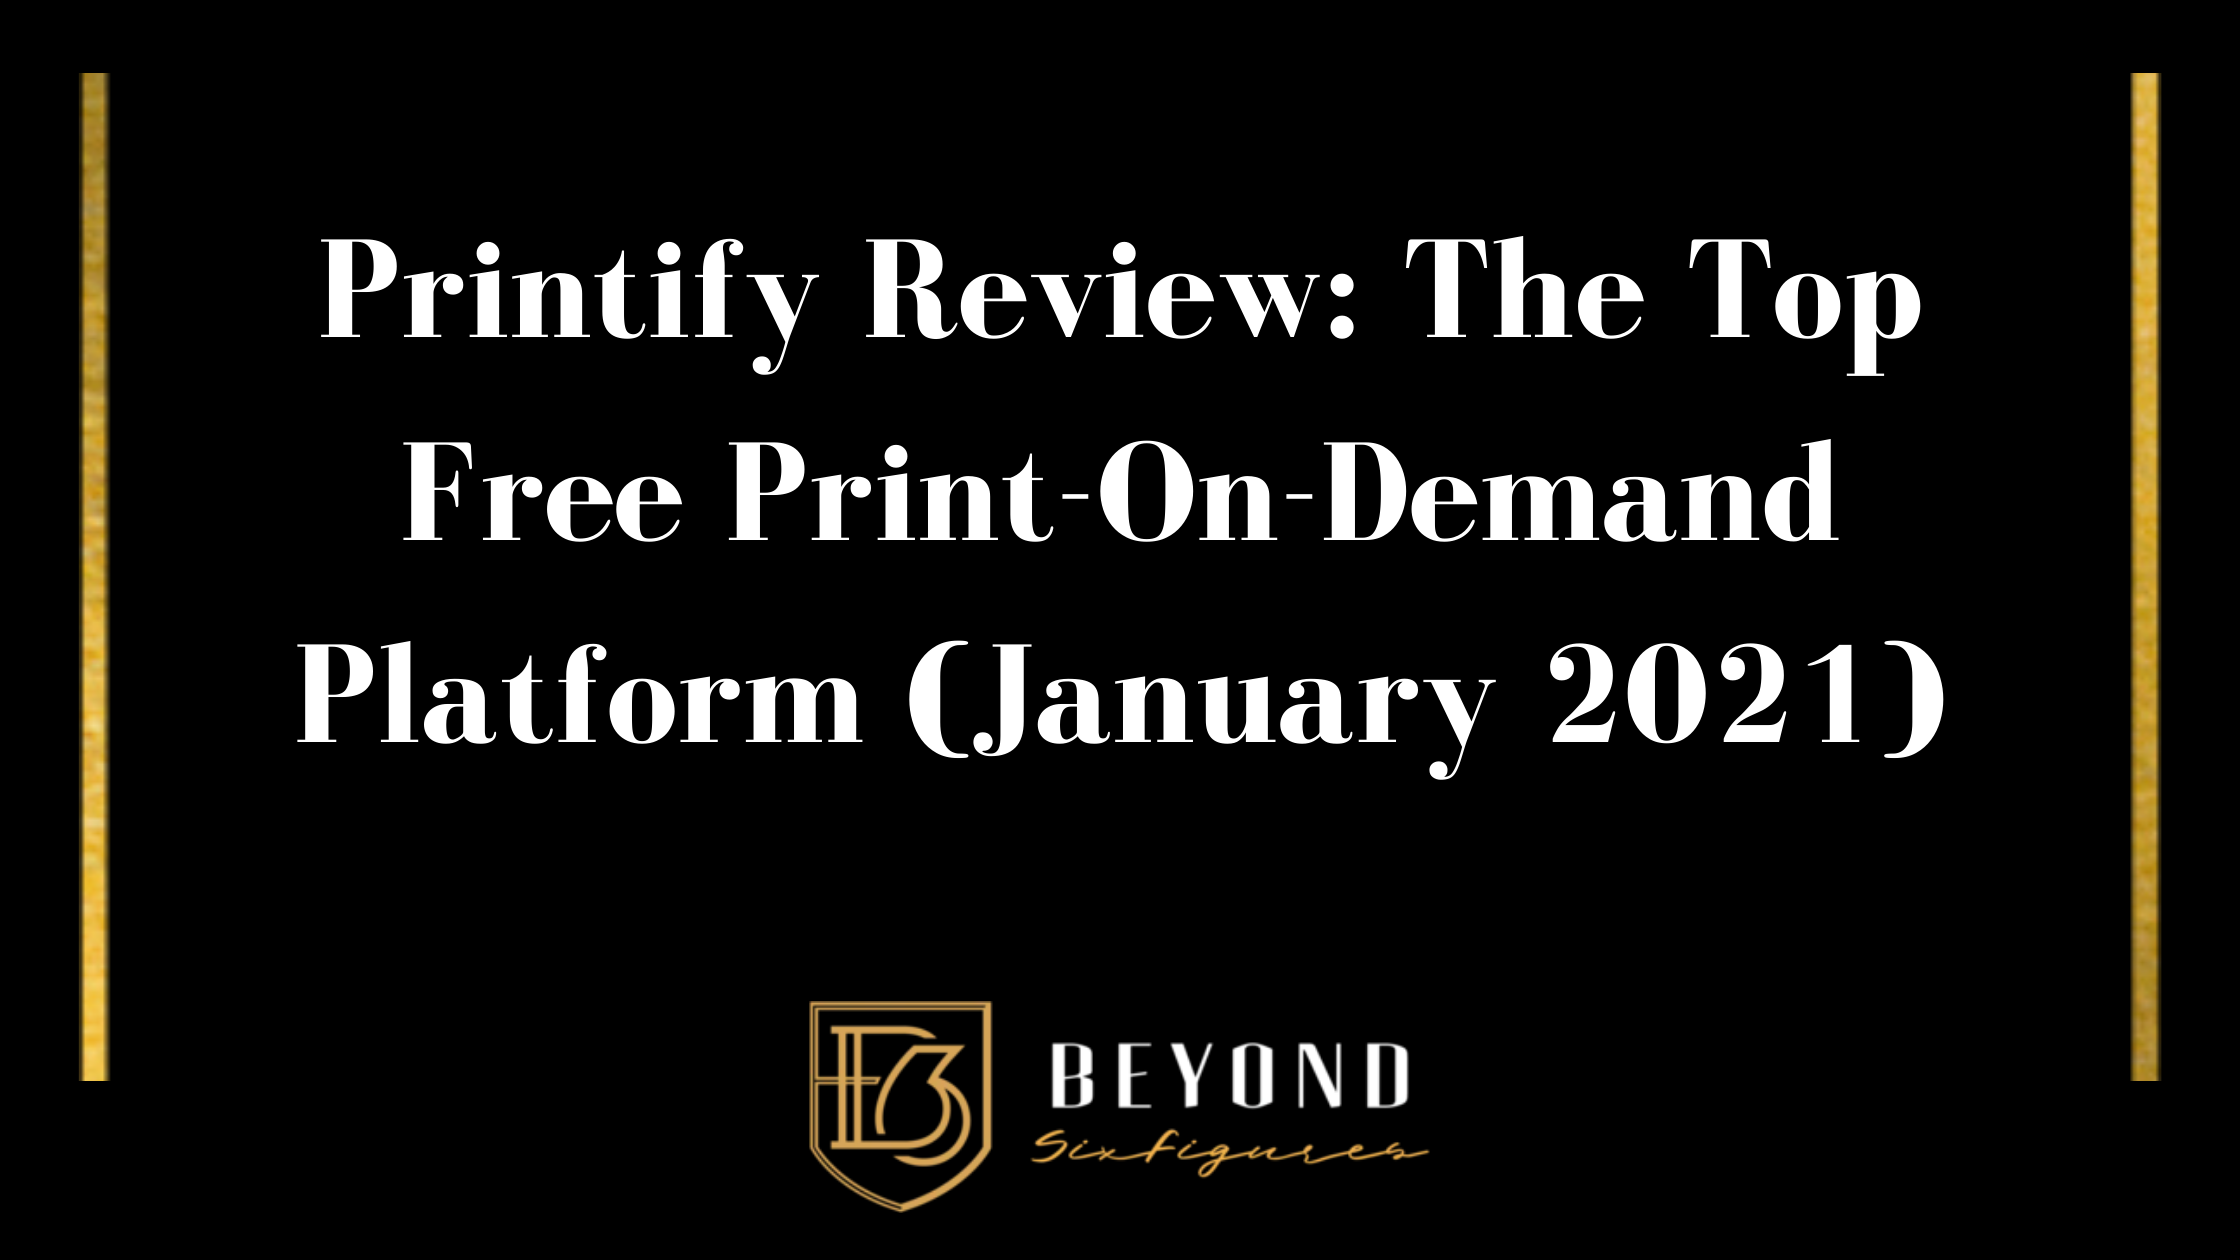 Blog Banner for Printify Review: The Top Free Print-On-Demand Platform (January 2021)